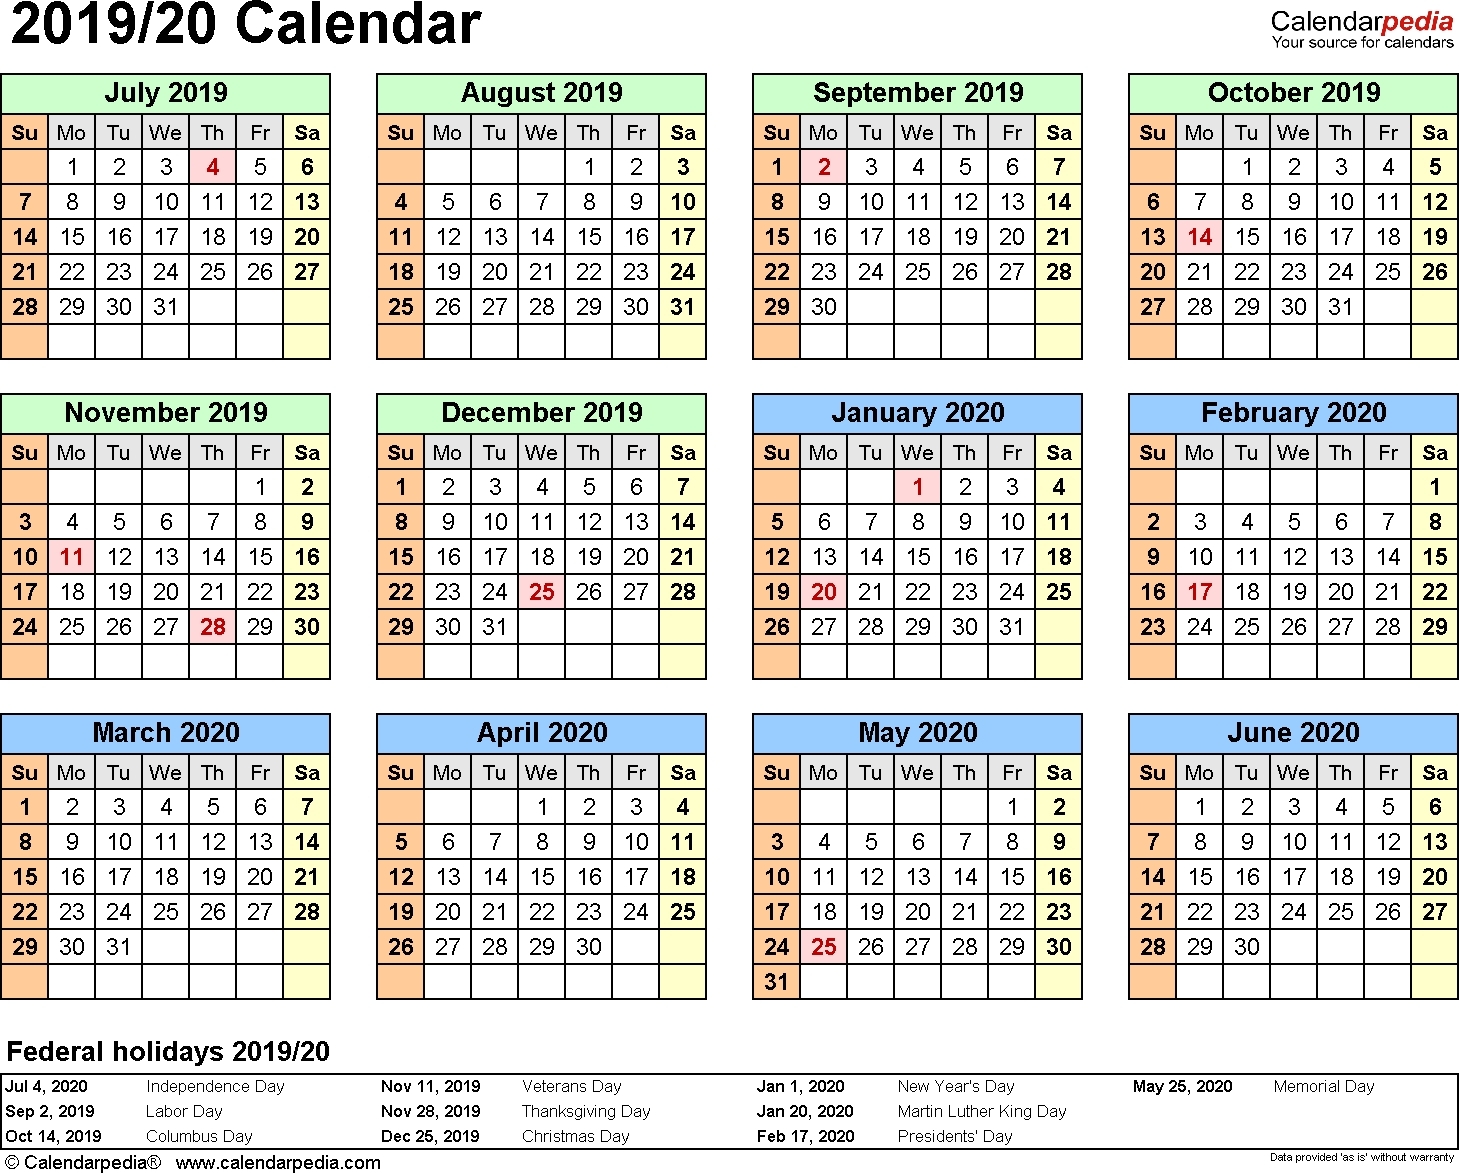 Free Printable 2020 Calendar With Holidays South Africa-April Holidays 2020 In South Africa